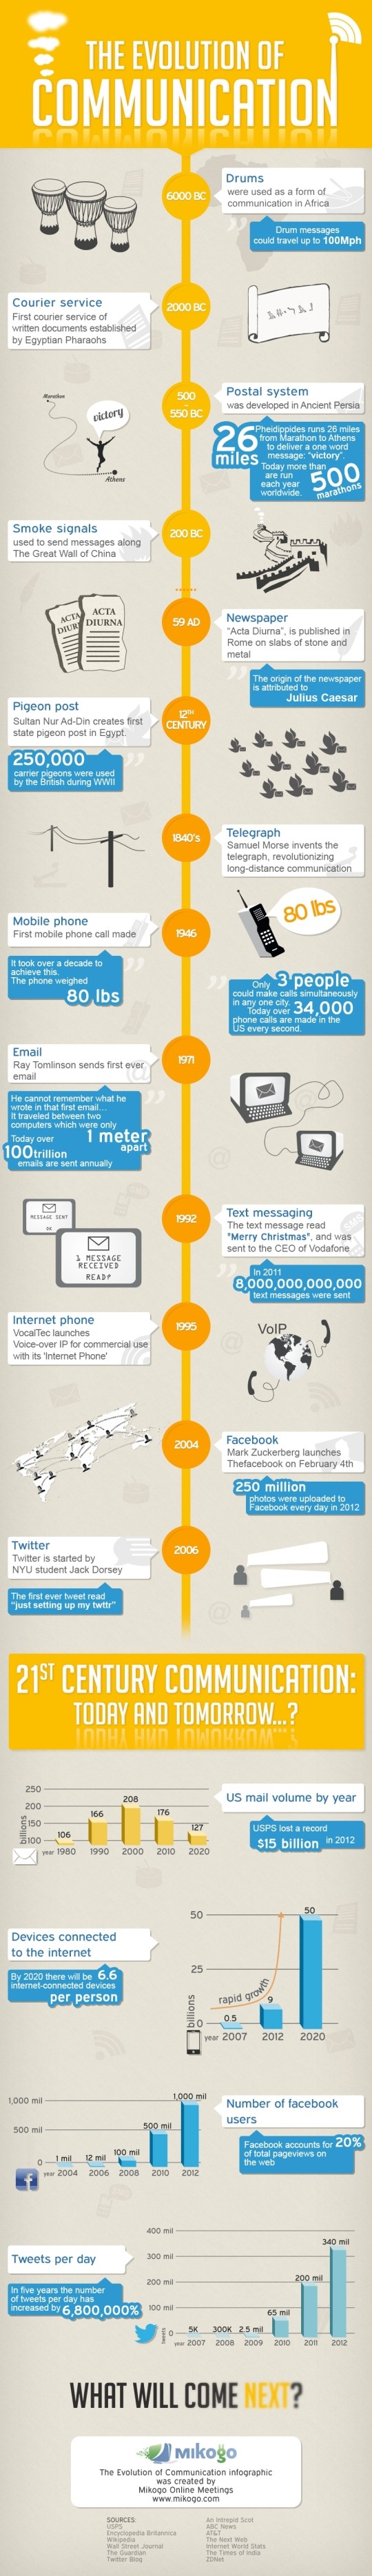 The Evolution of Communication Infographic